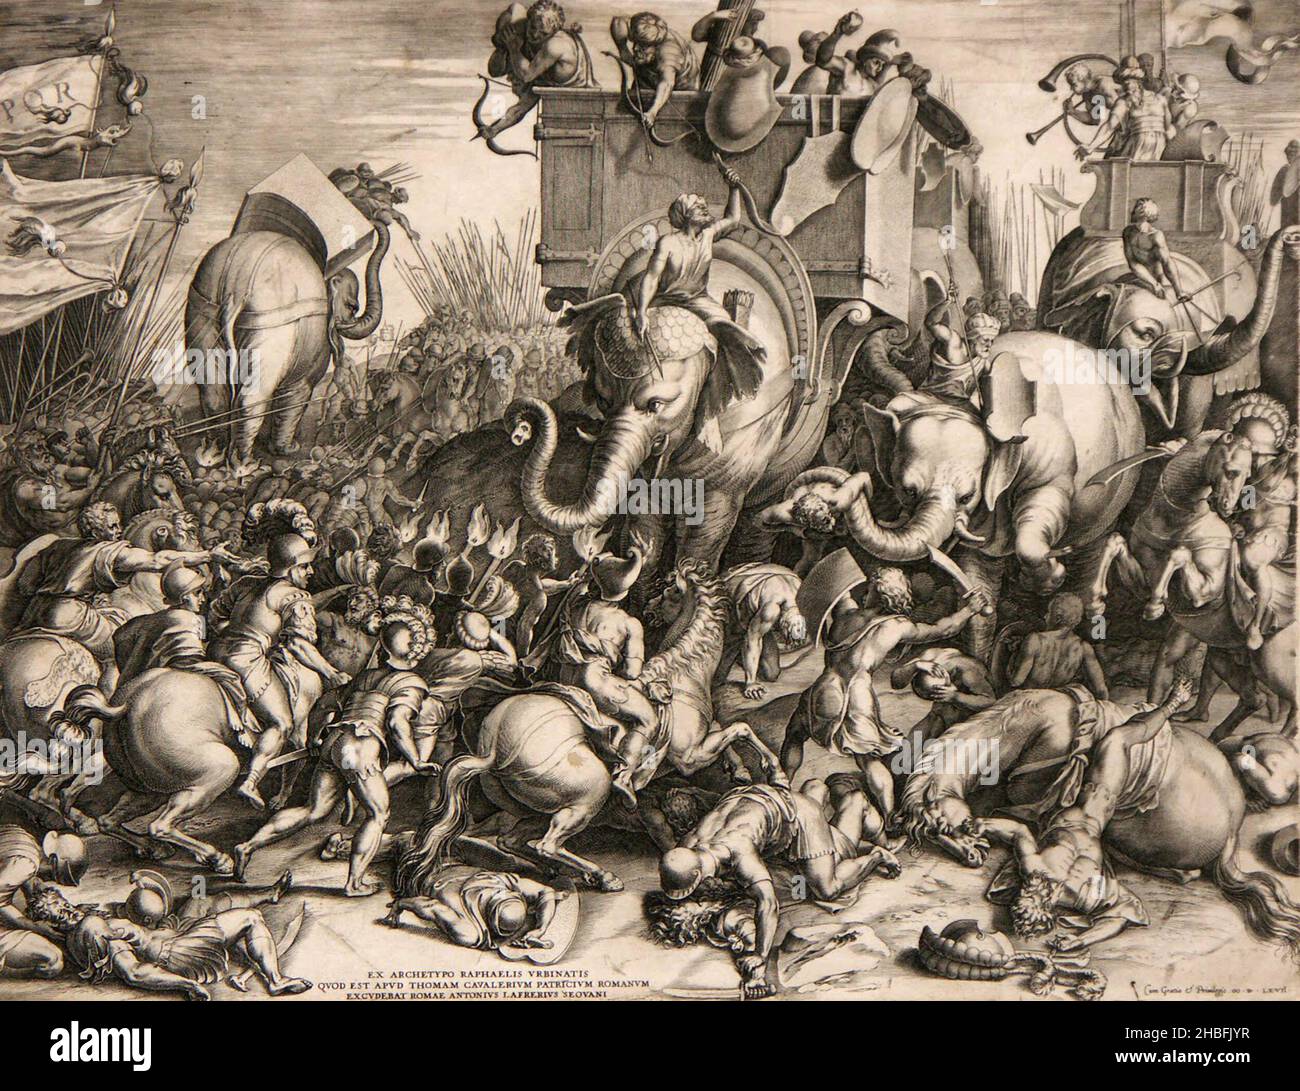 Hannibal and his elephants fighting at the Battle of Zama (in Yunisia) against Scipio Africanus during the Punic Wars (the wars against Carthage) Stock Photo